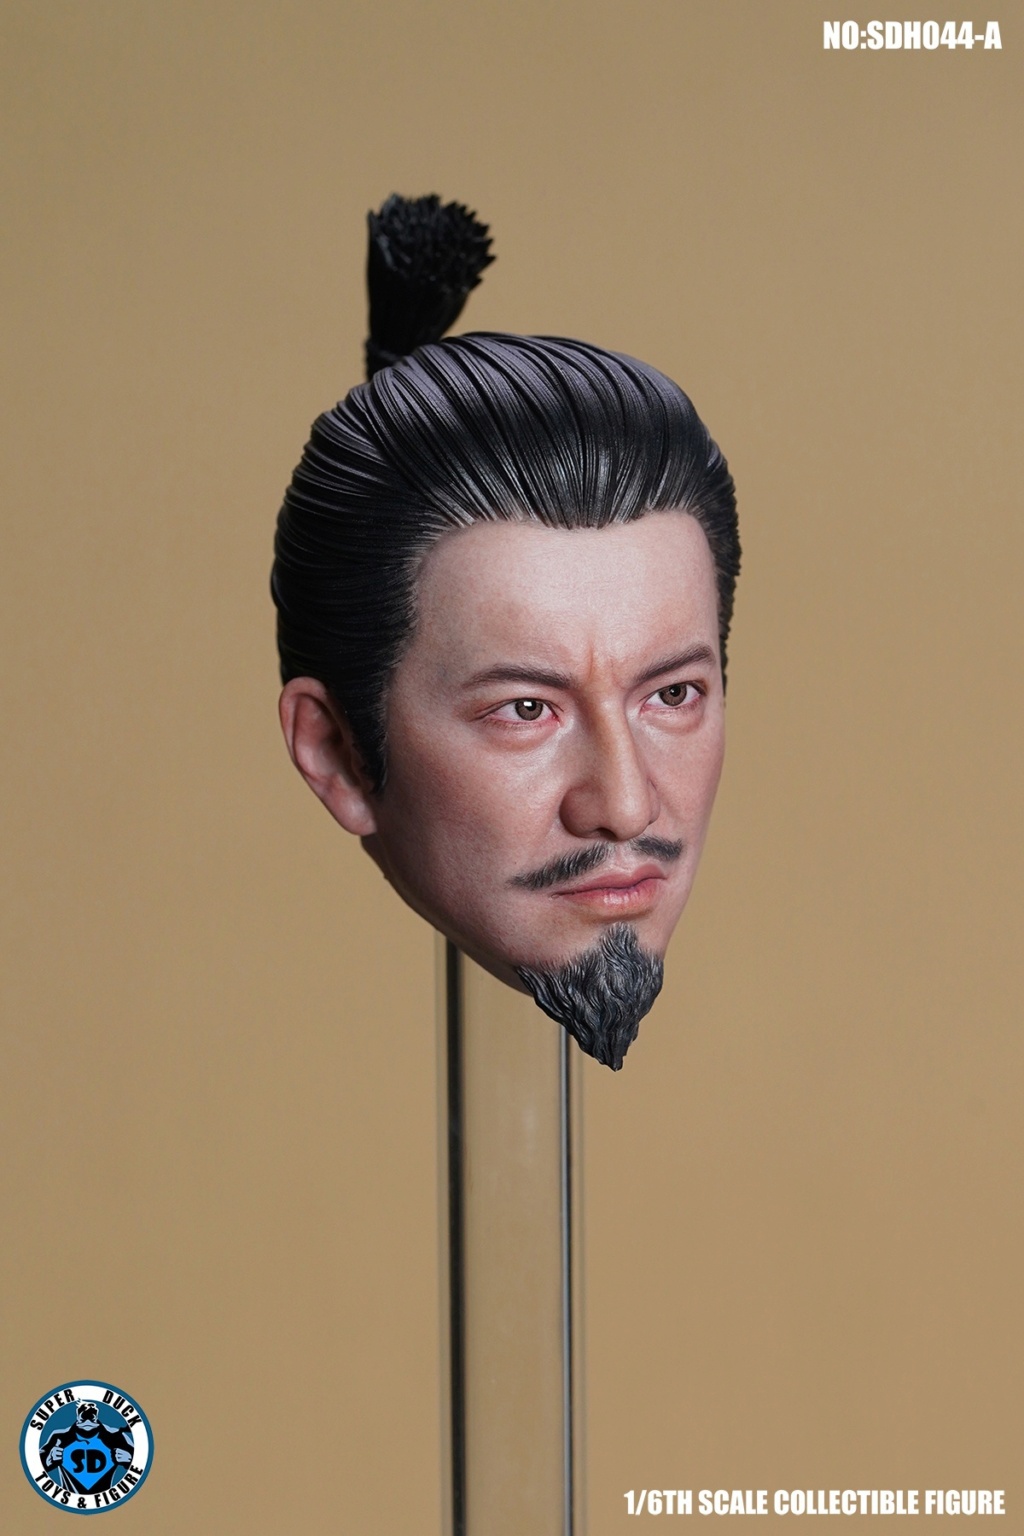 accessory - NEW PRODUCT: Super Duck: 1/6 Japanese samurai head carving (SDH044-A version without neck, SDH044-B version with neck) 21225012